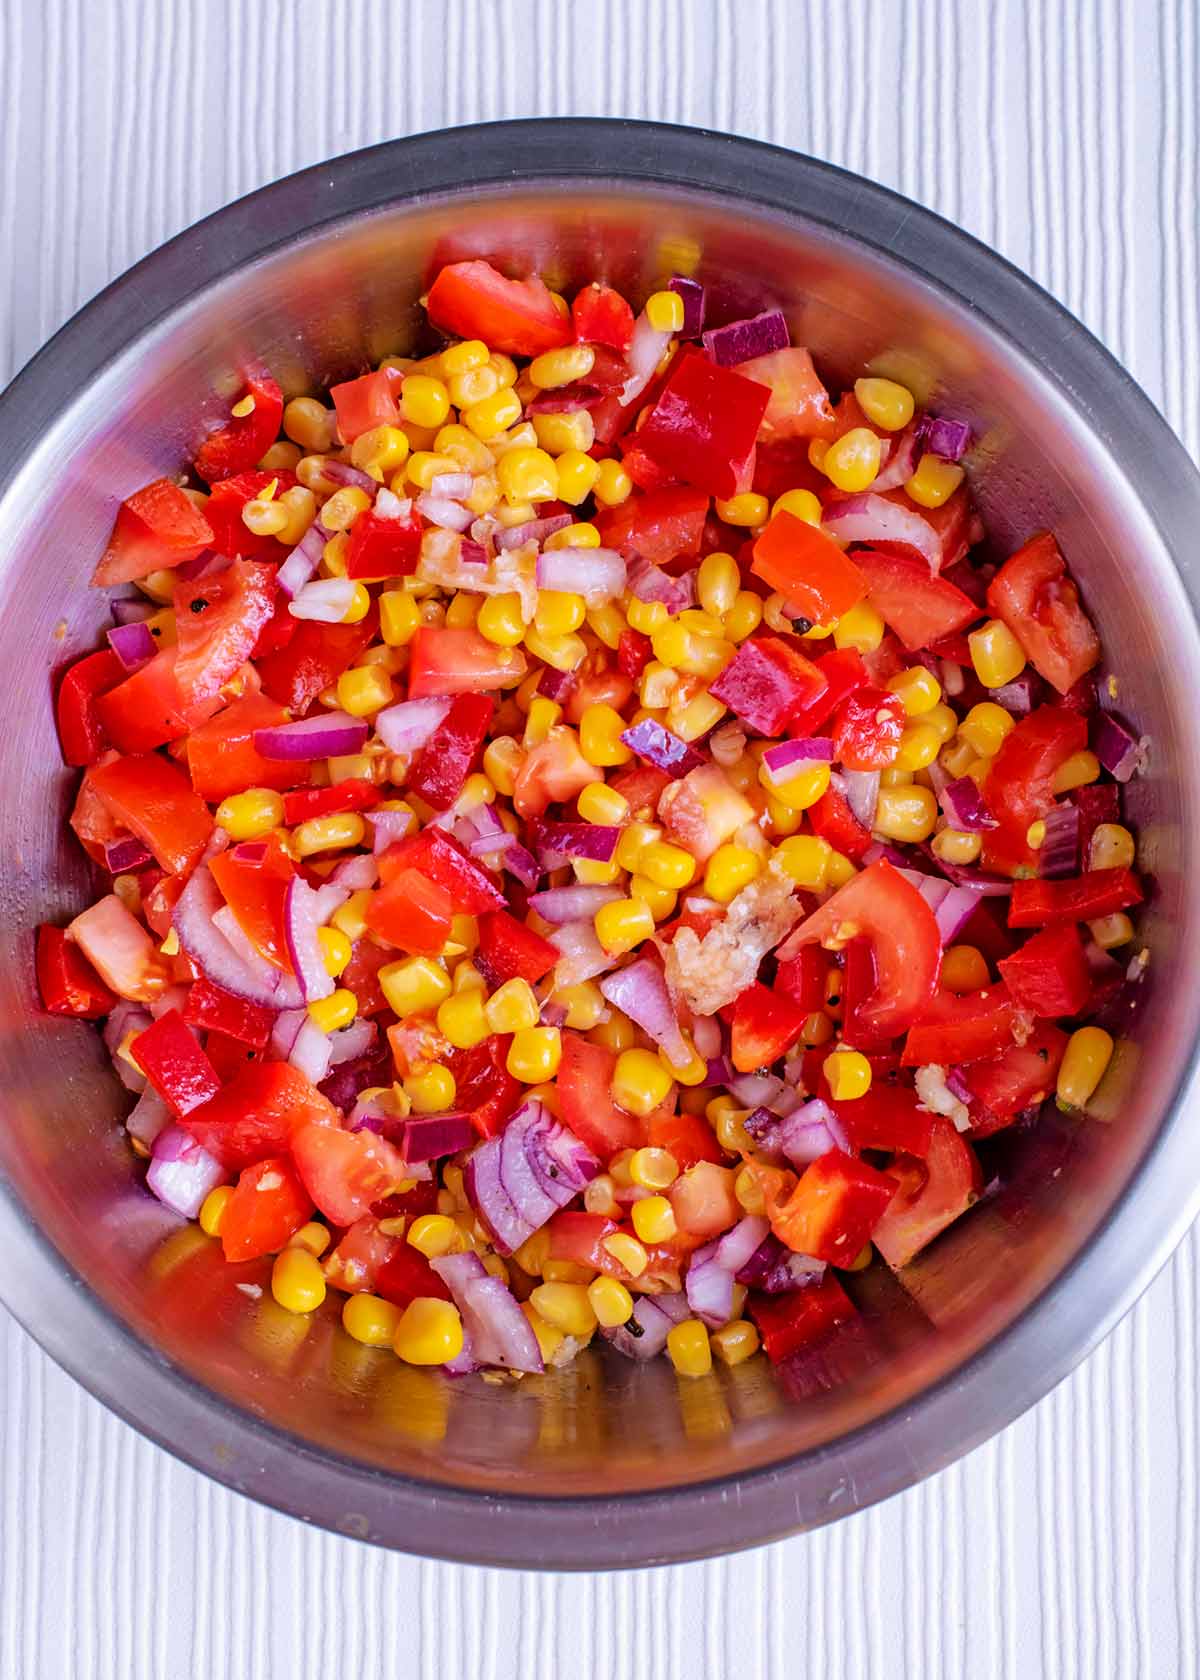 A metal bowl containing sweetcorn, red pepper, tomatoes and red onion.